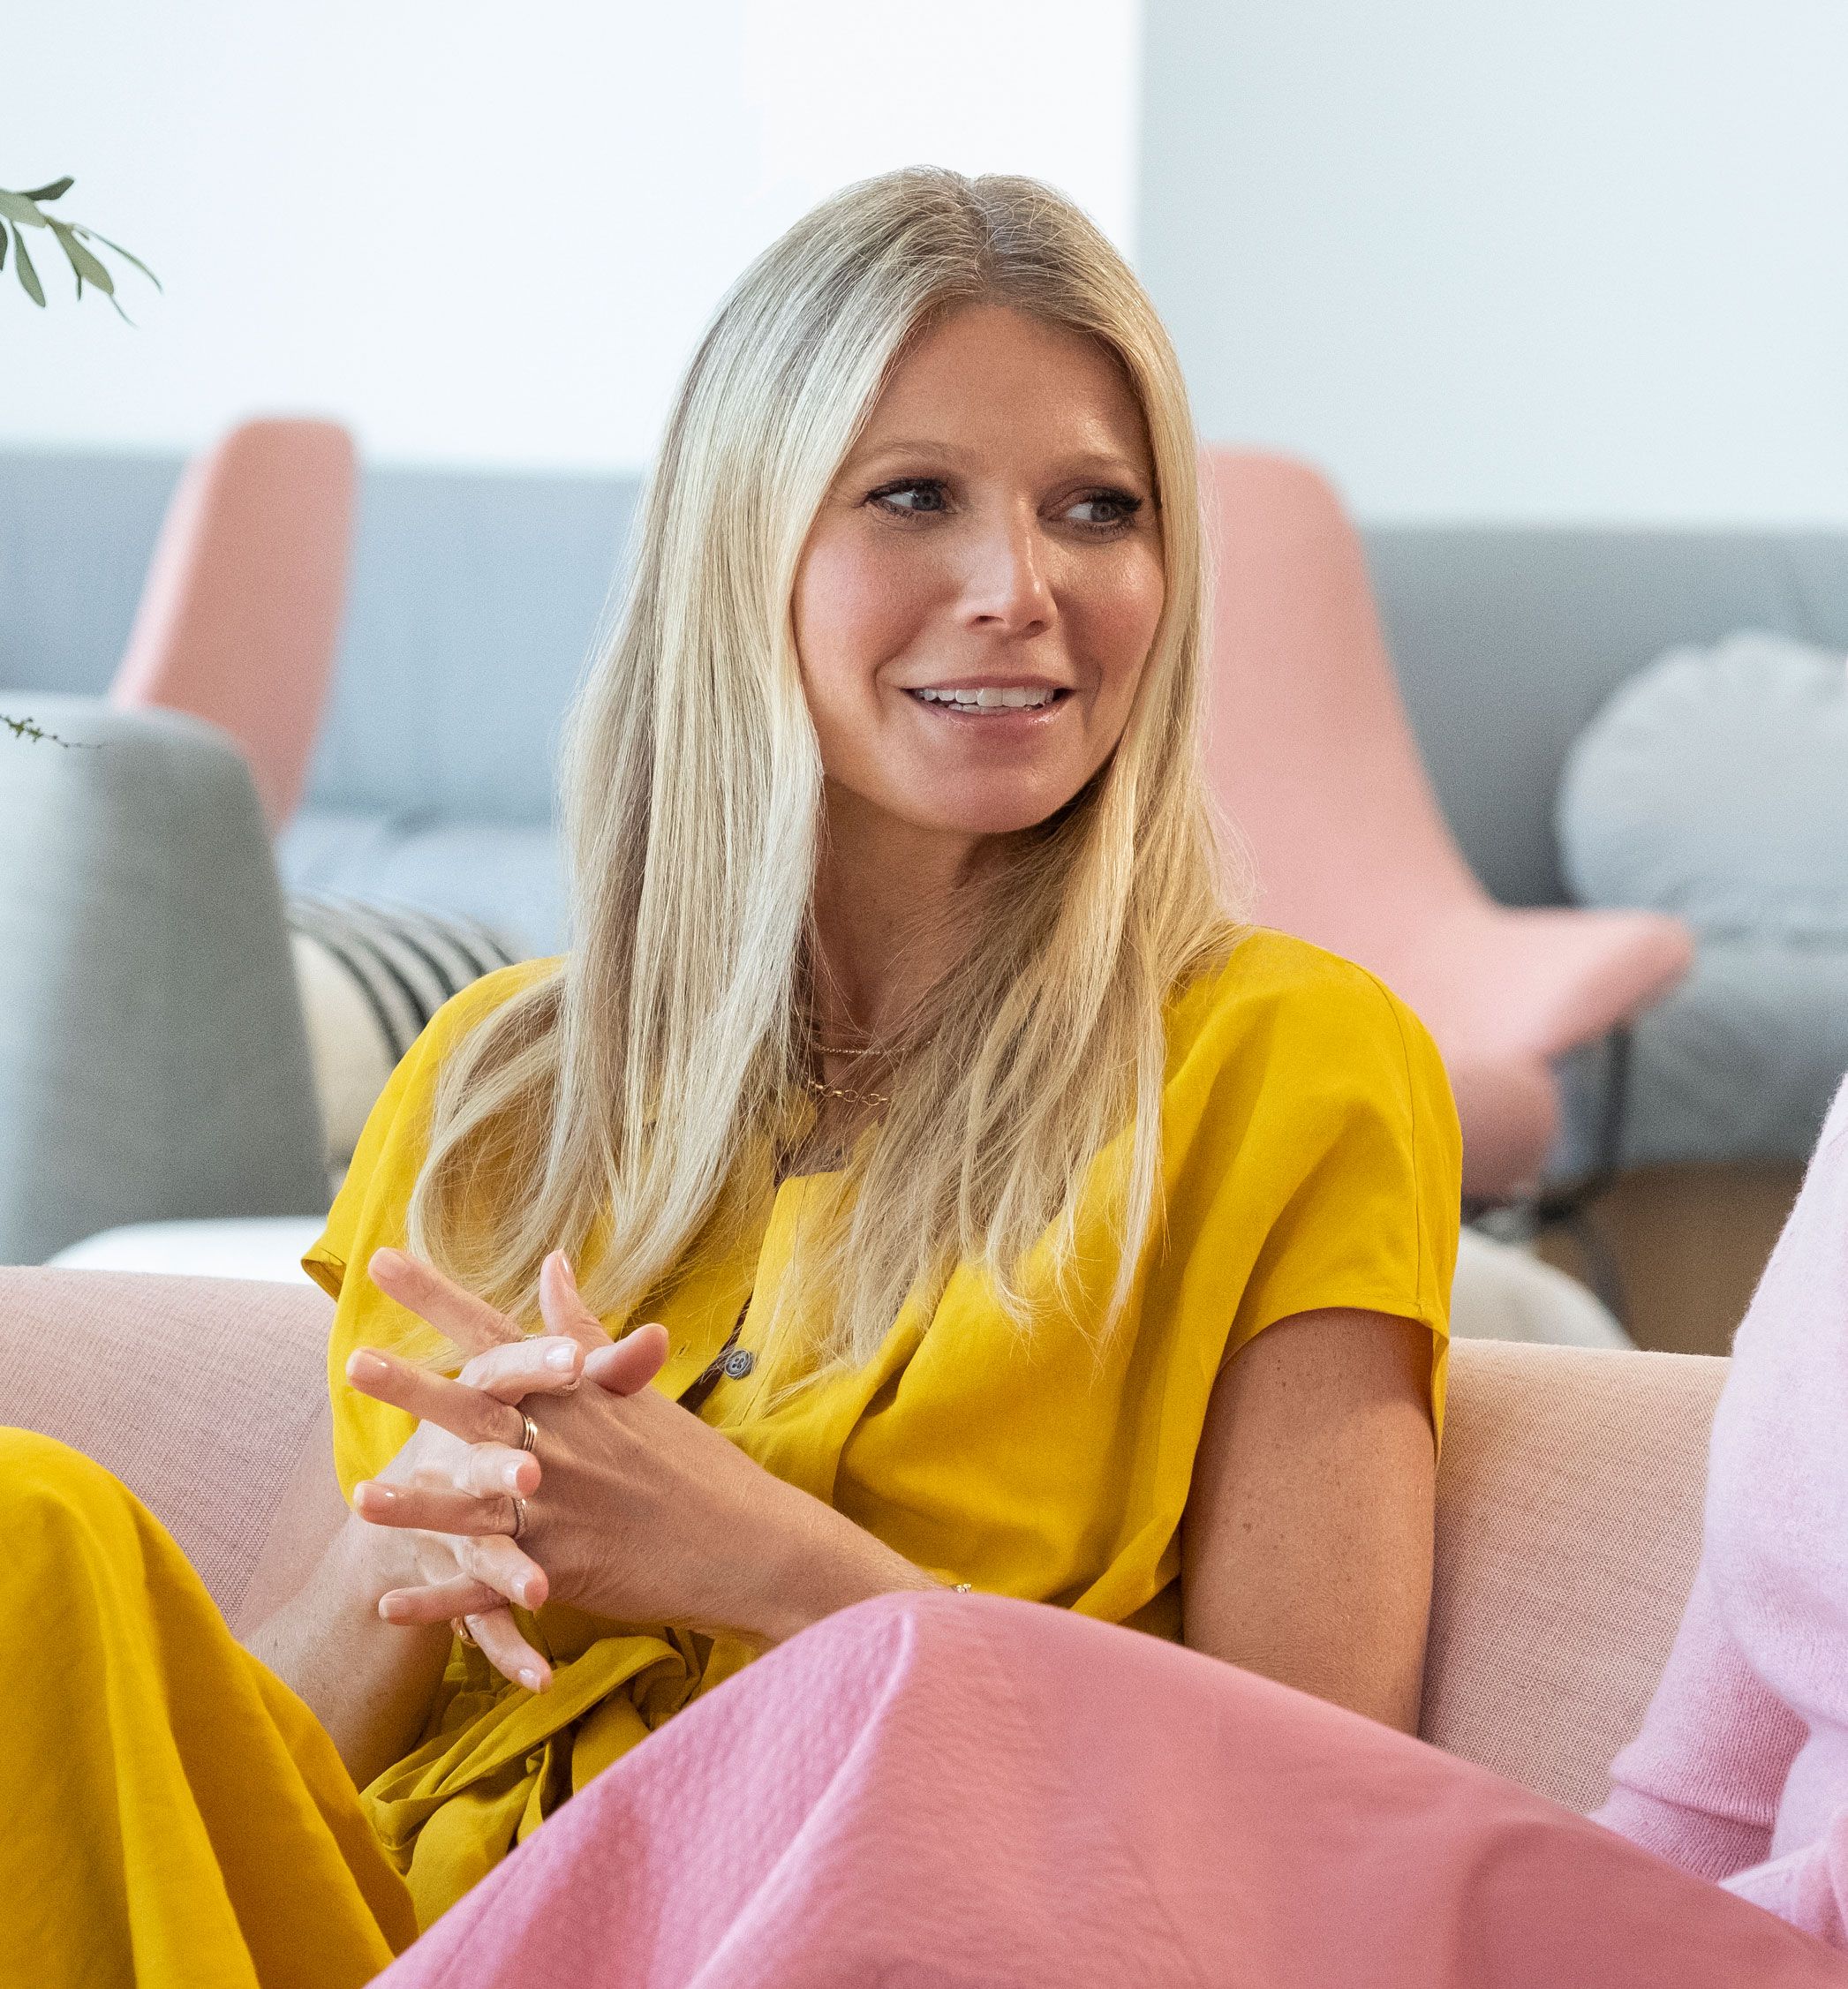 Gwyneth Paltrow and GOOP still want you to put a jade egg in your